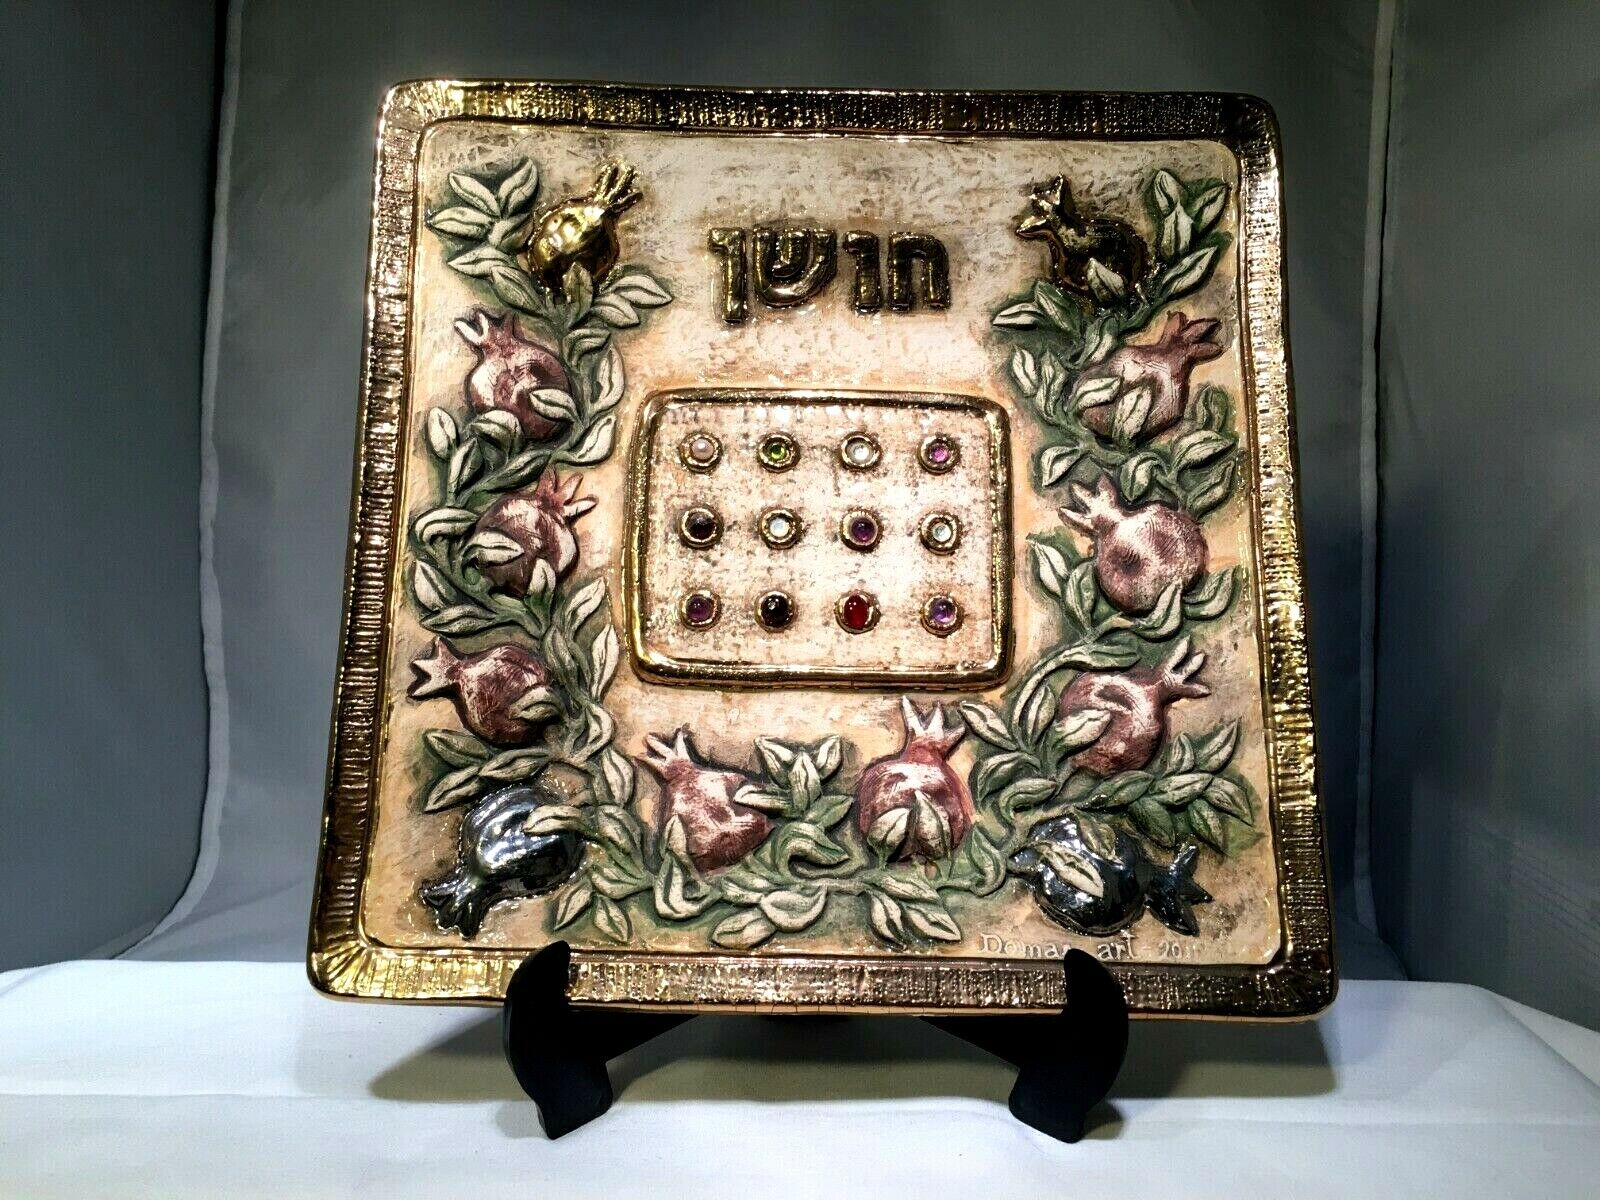 DOMAR ART ISRAEL HIGH PRIEST BREAST PLATE SQUARE CERAMIC PLATE 12 TRIBES AMAZING